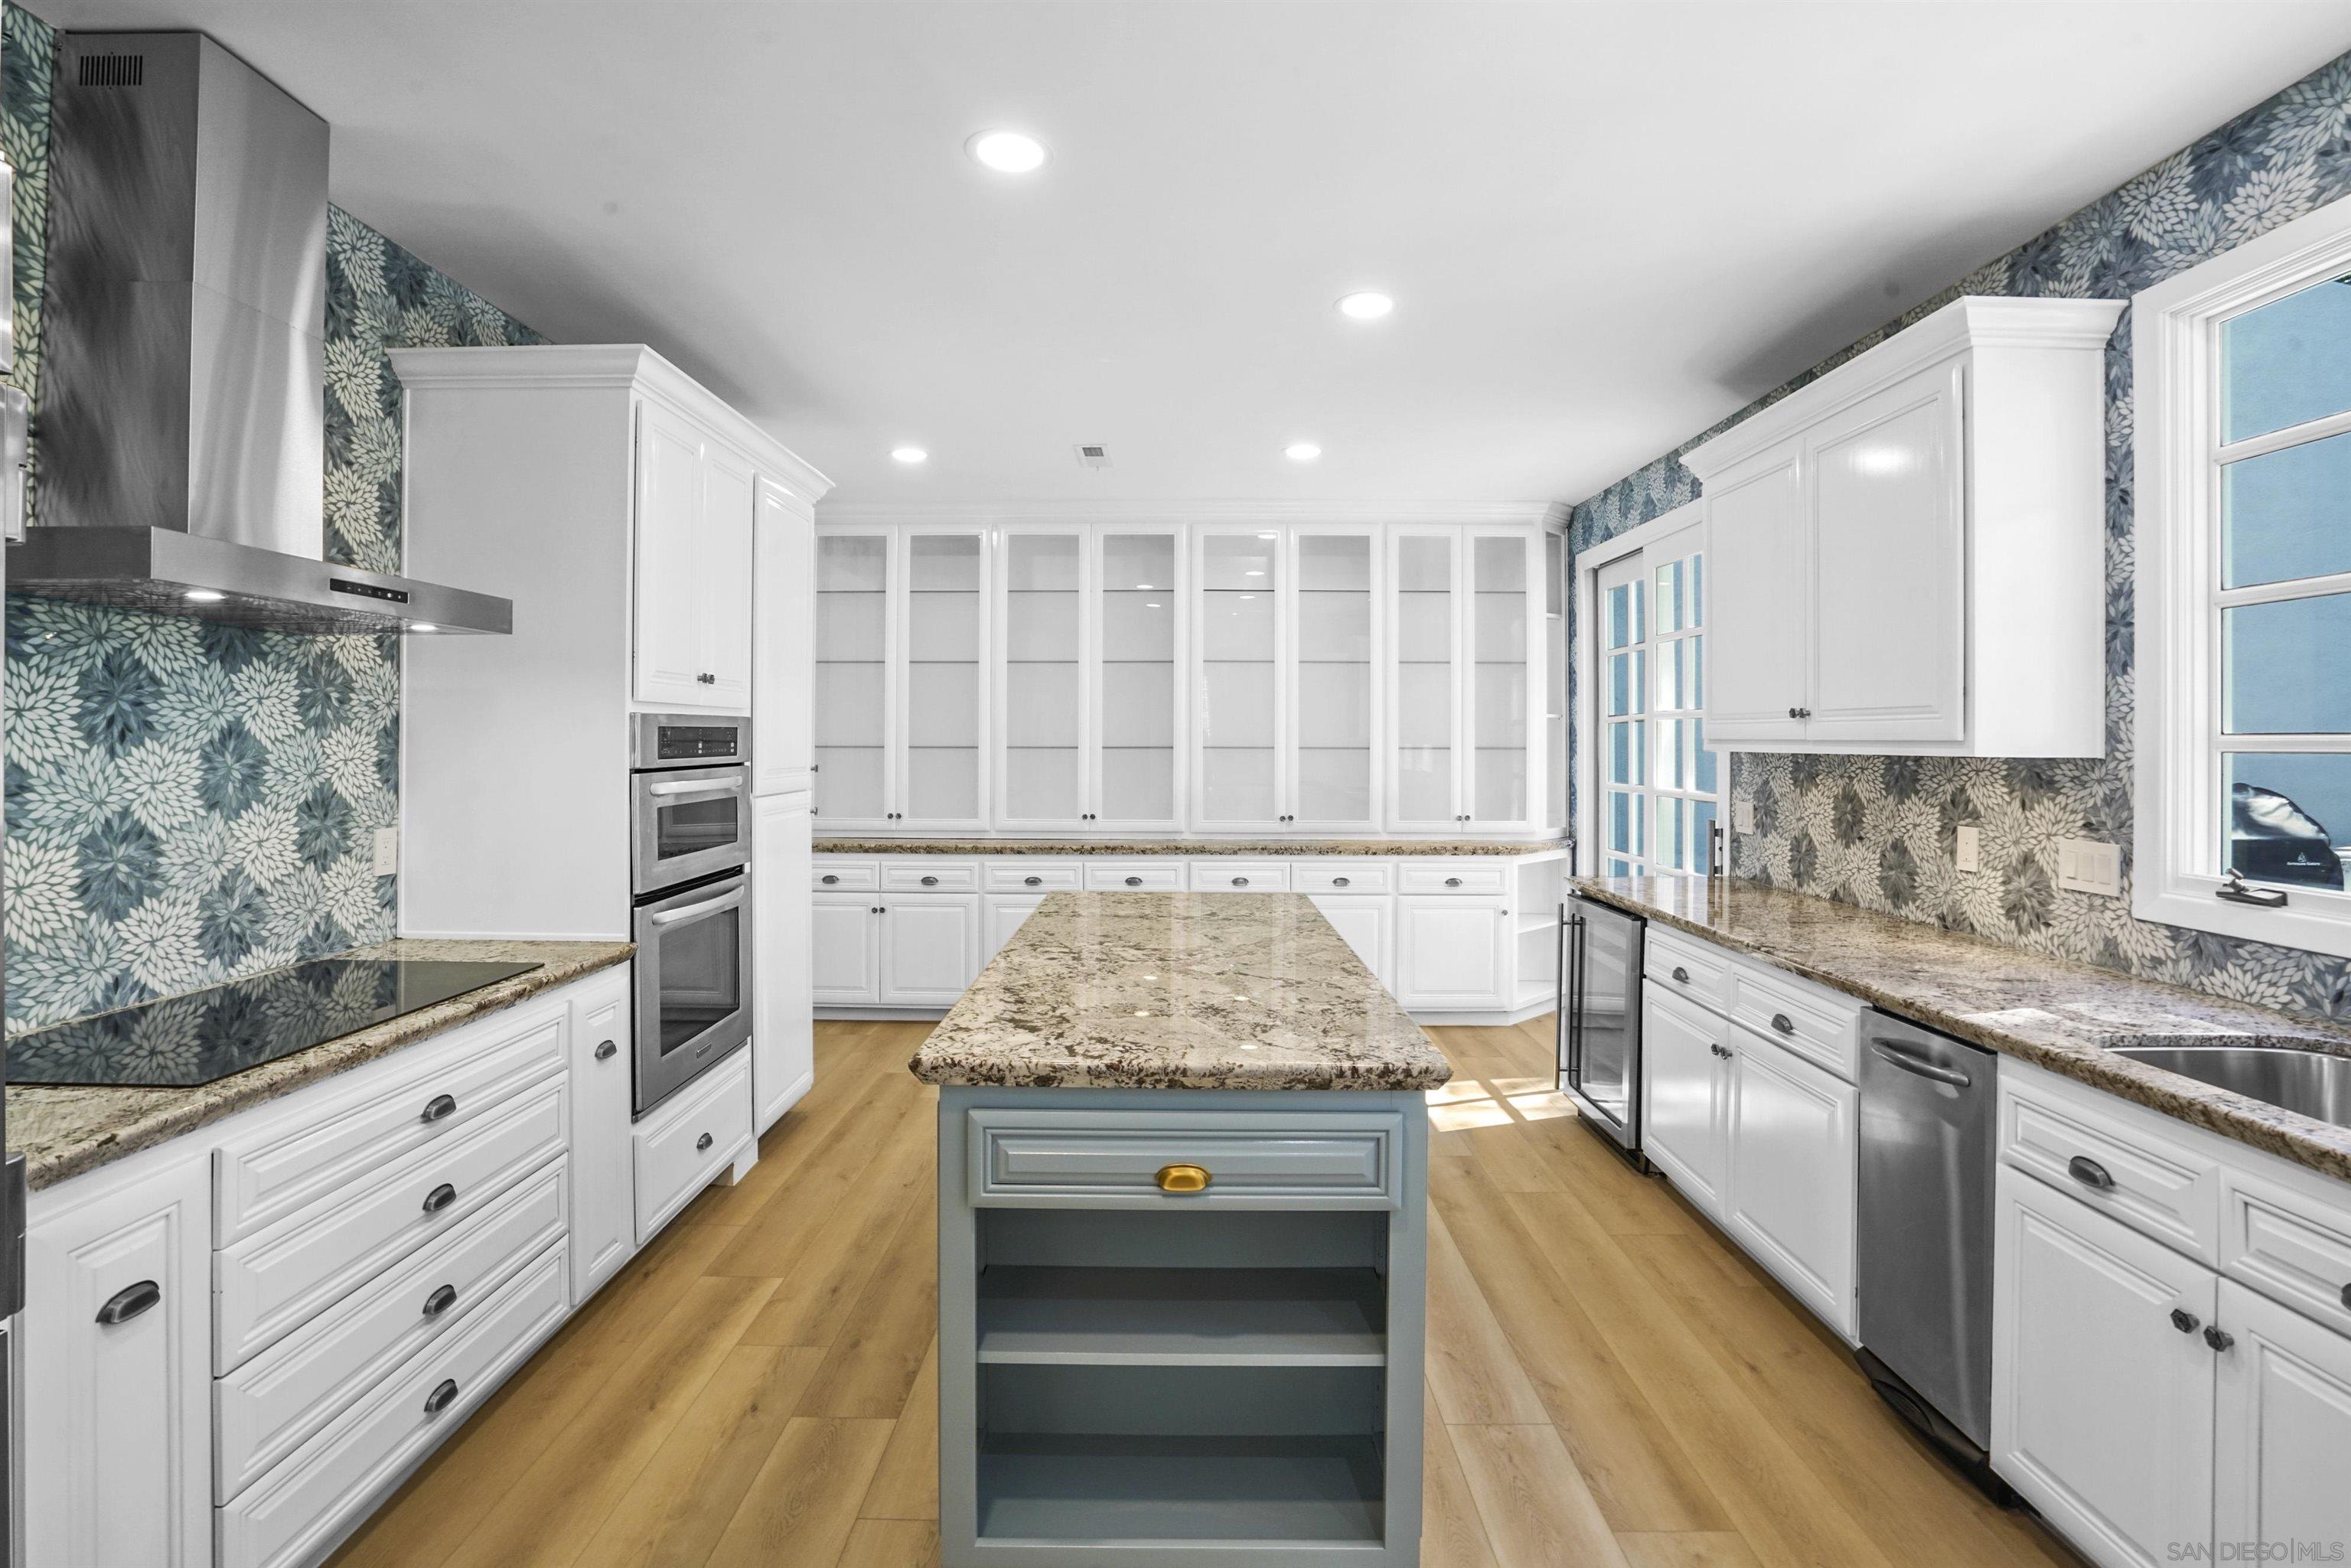 a kitchen with kitchen island granite countertop white cabinets and white stainless steel appliances